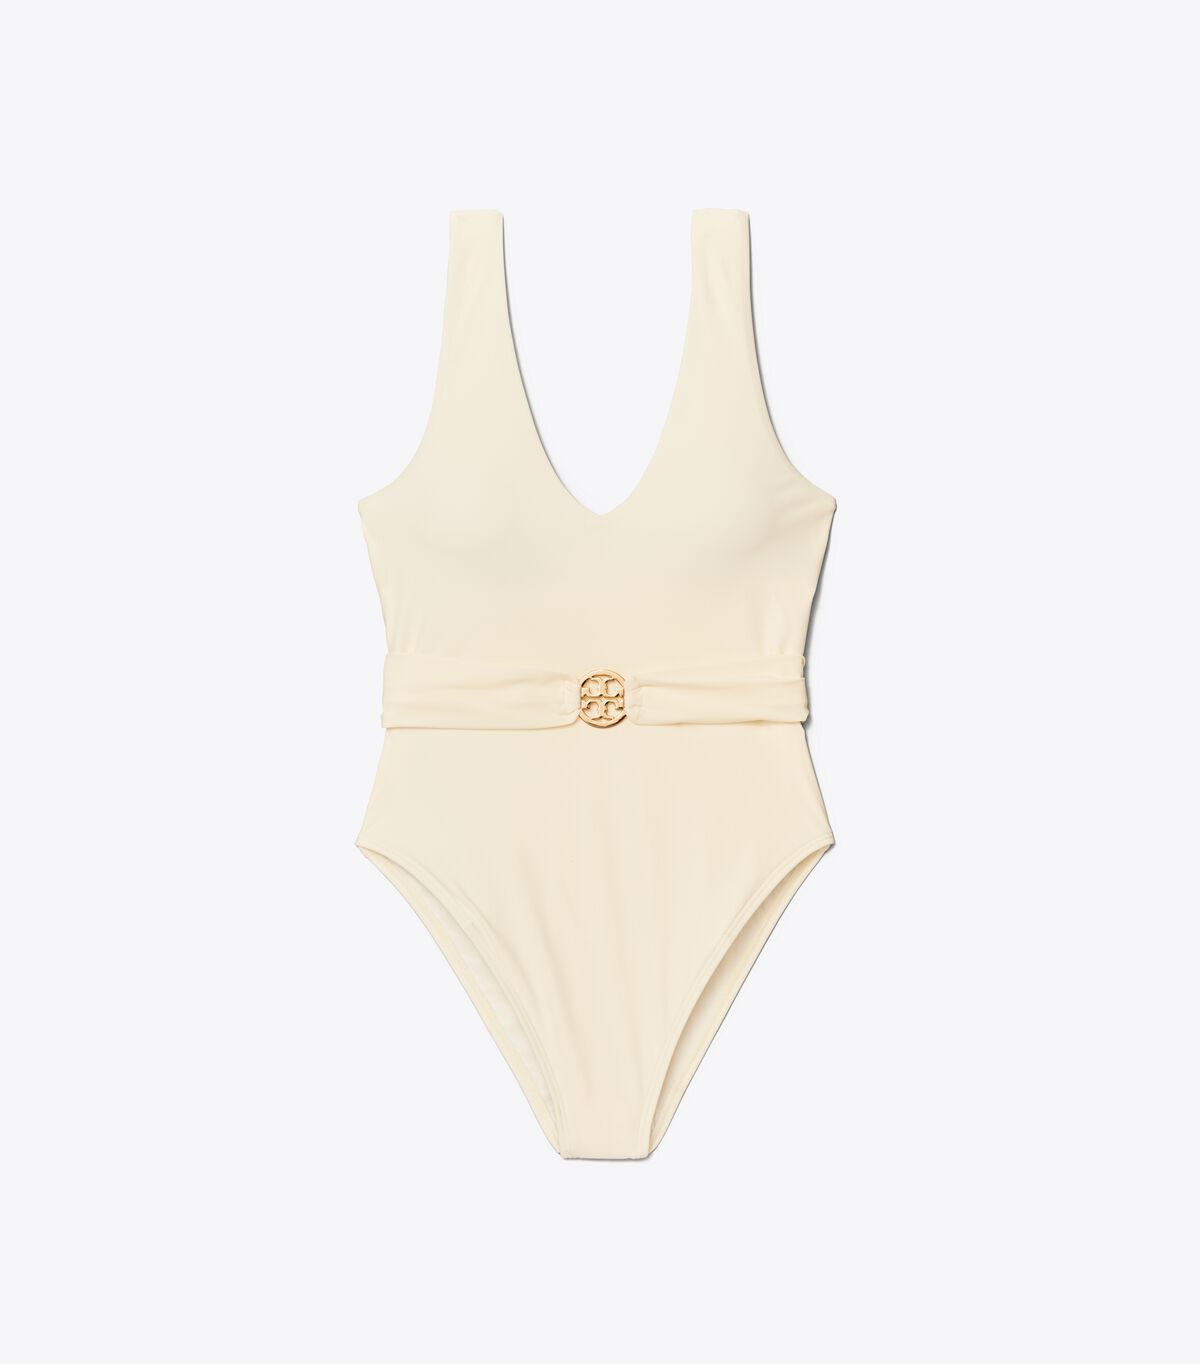 Tory Burch Swimsuits Cheapest Price - White Miller Plunge One-piece Womens